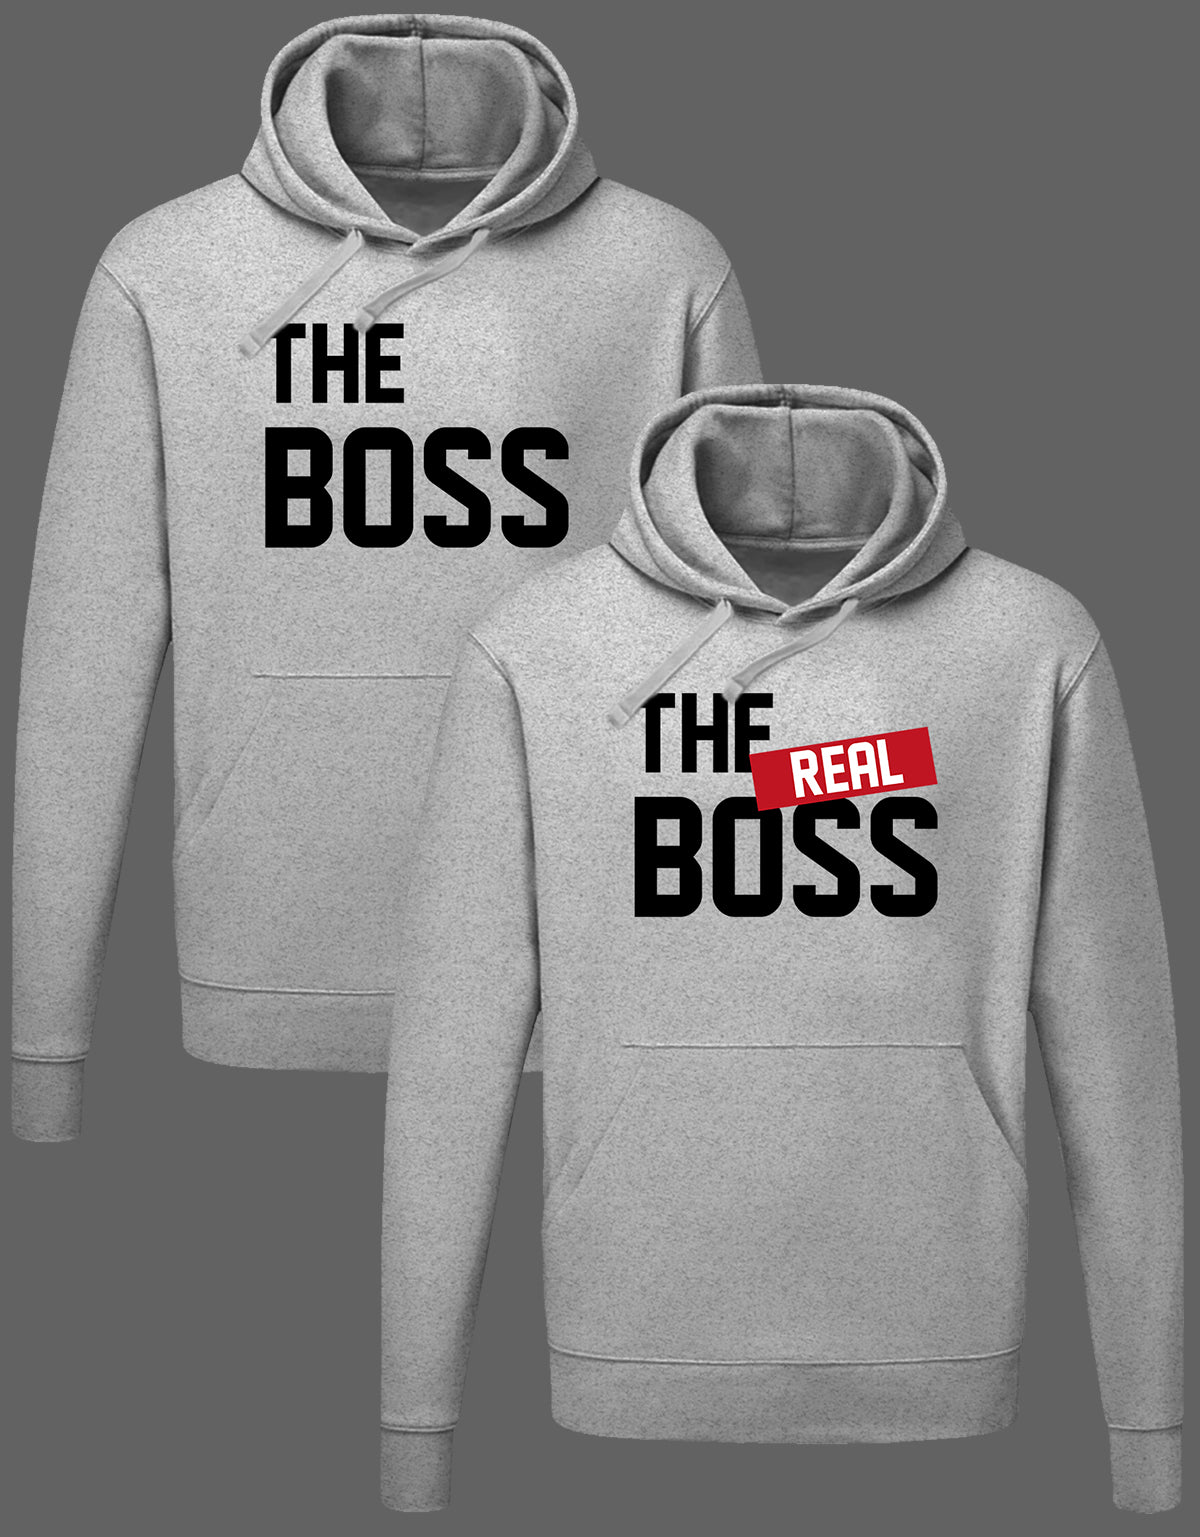 Couple Hoodie für Partner The Boss oder The Real Boss